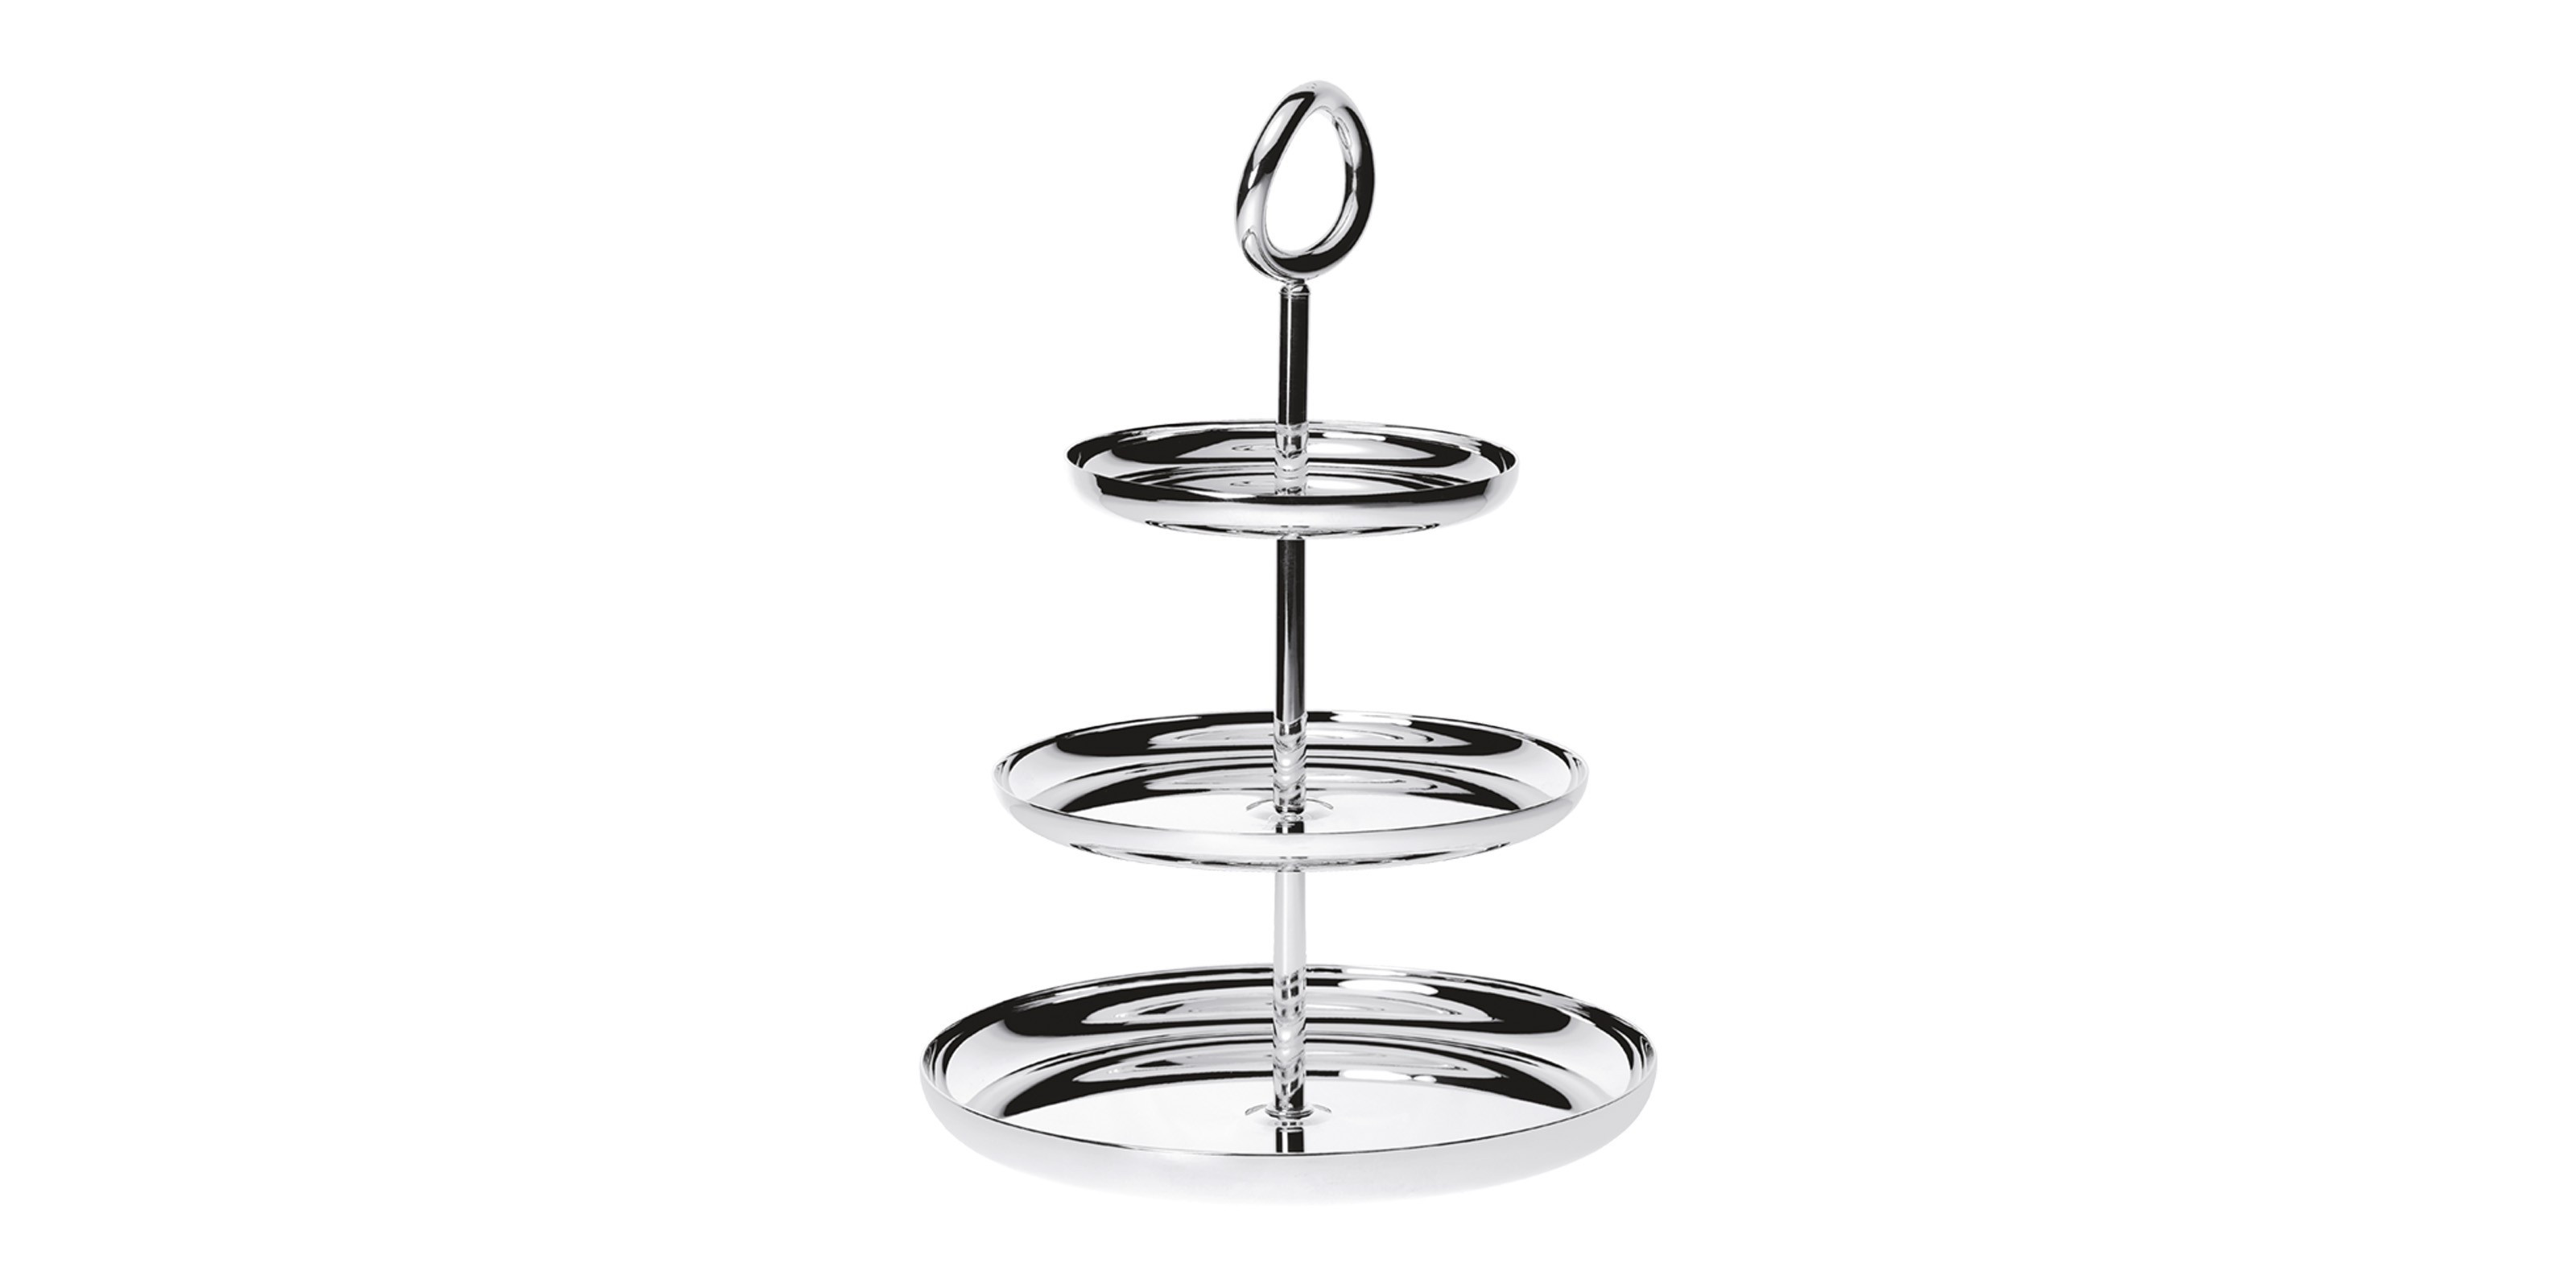 20 attractive Christofle Uni Vase 2024 free download christofle uni vase of tableware porcelain plates serving dishes table accessories throughout silver plated three tier dessert stand